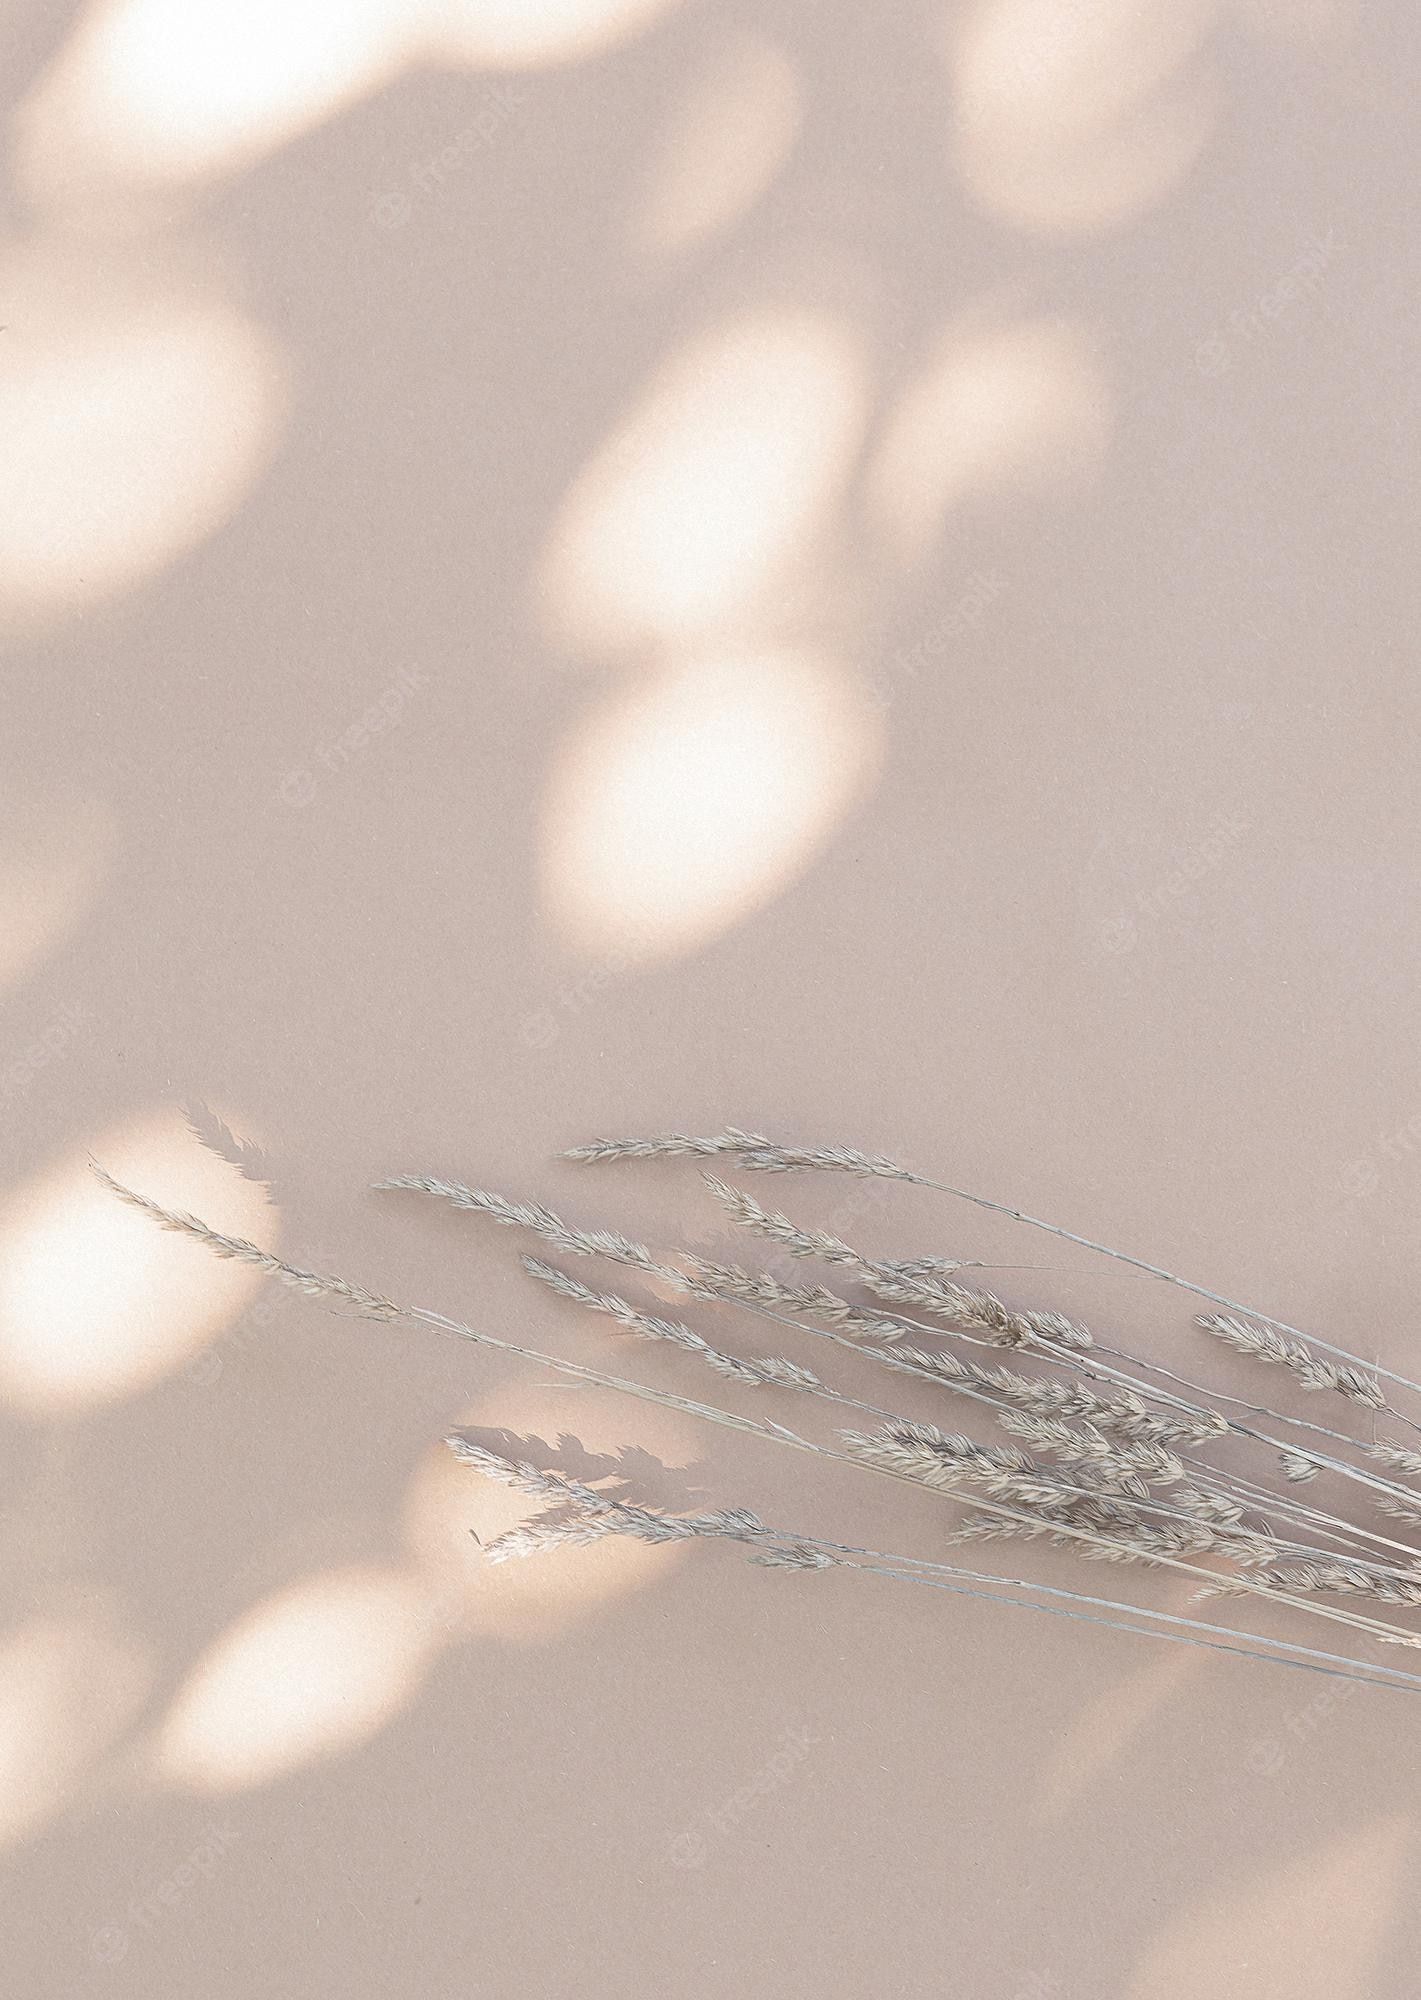 Premium Photo. Wheat and sunlight shadows on beige wall. aesthetic minimal wallpaper. summer autumn floral plant background composition